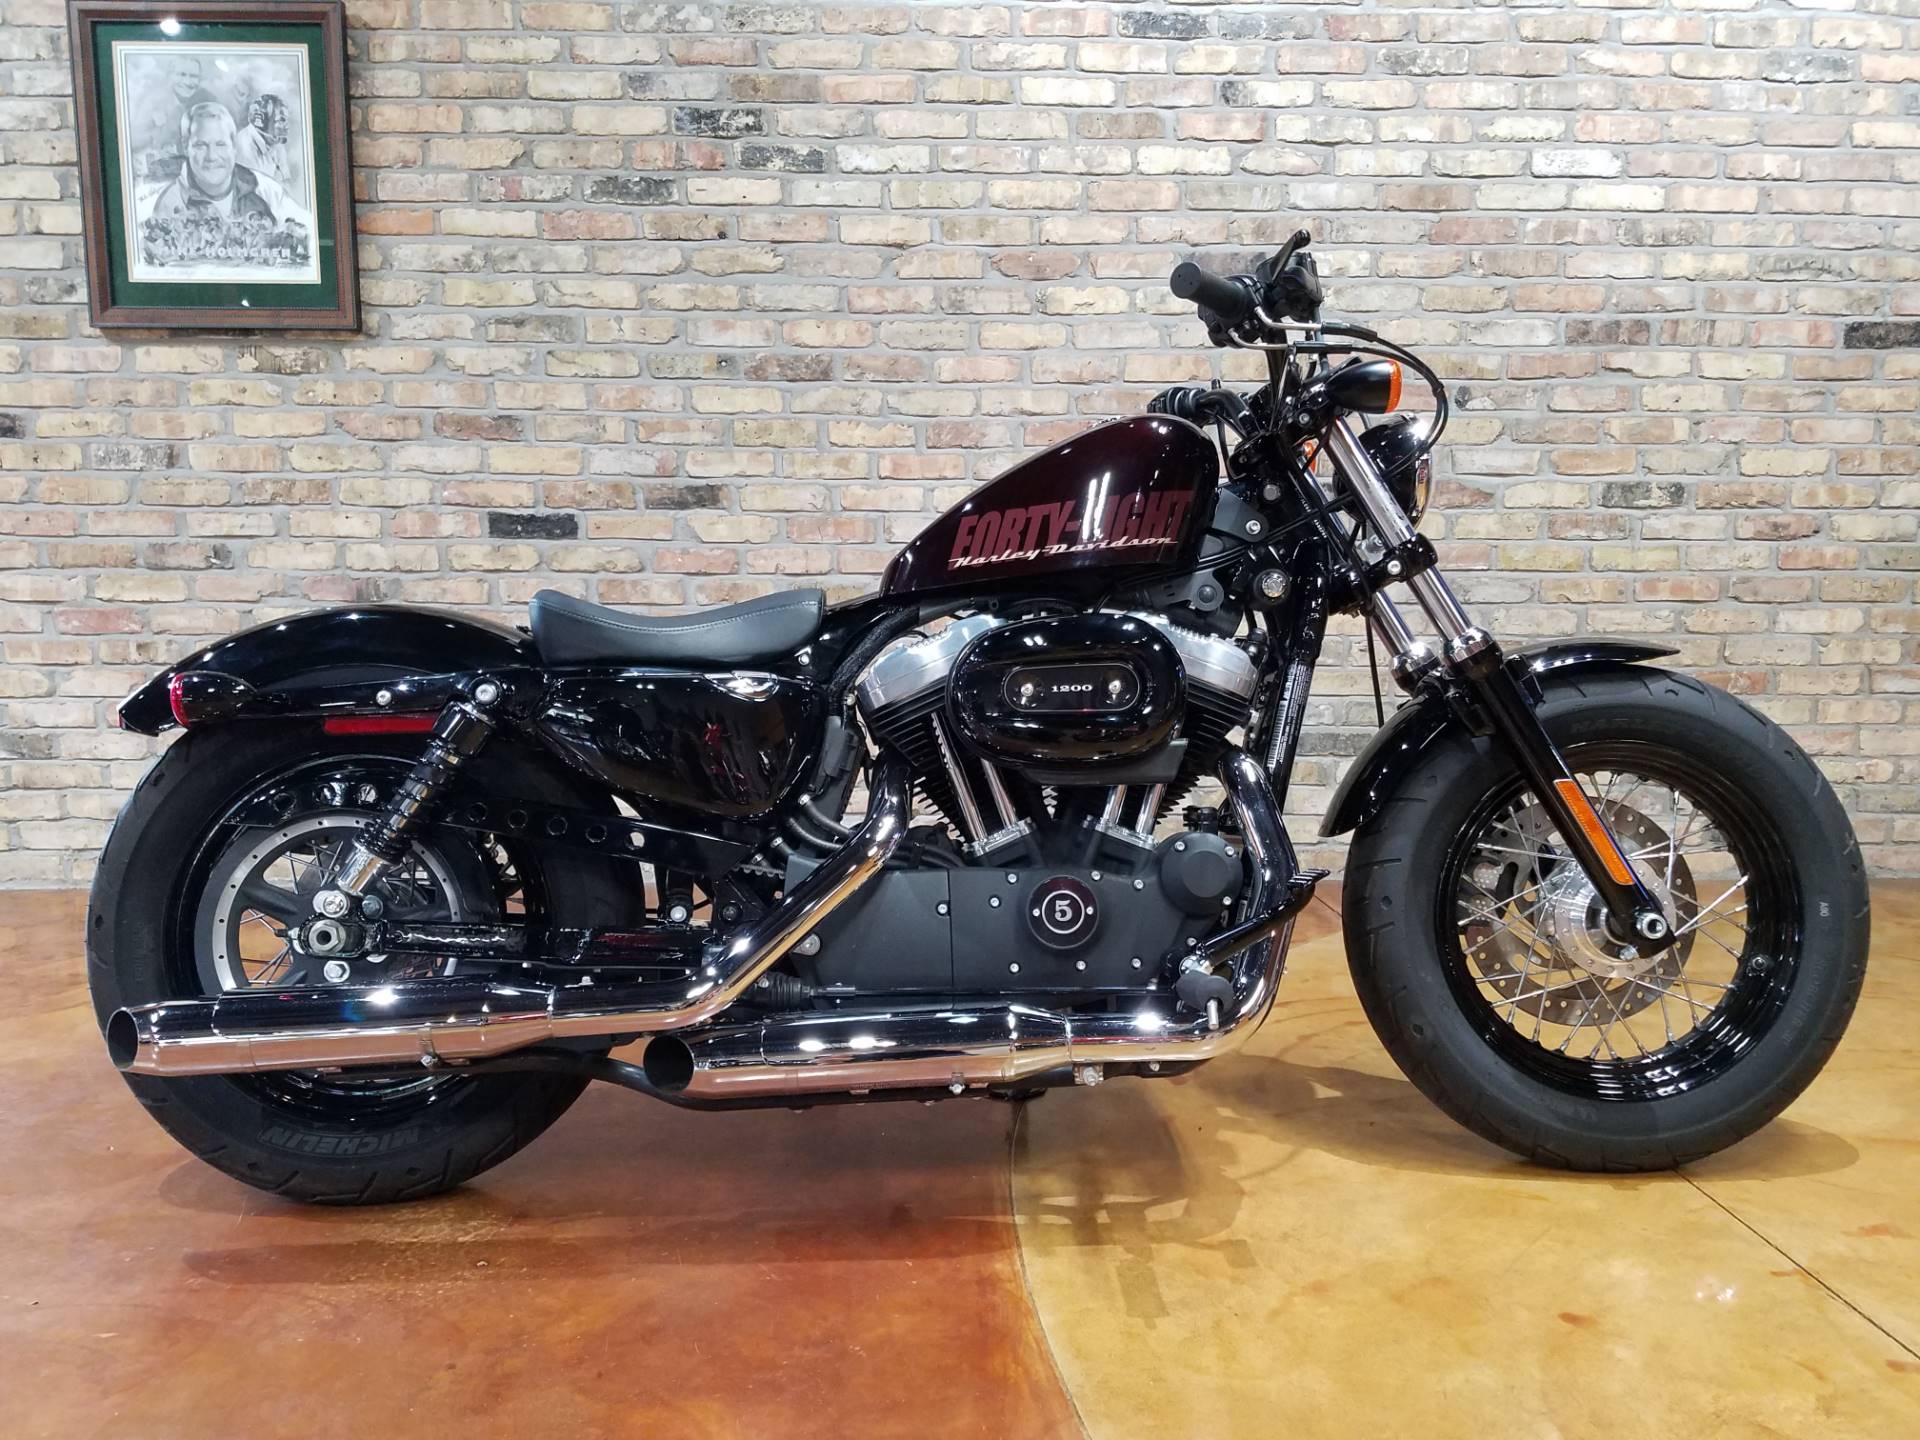 Used 2014 Harley Davidson Sportster Forty Eight Motorcycles In Big Bend Wi 4254j Blackened Cayenne Sunglo